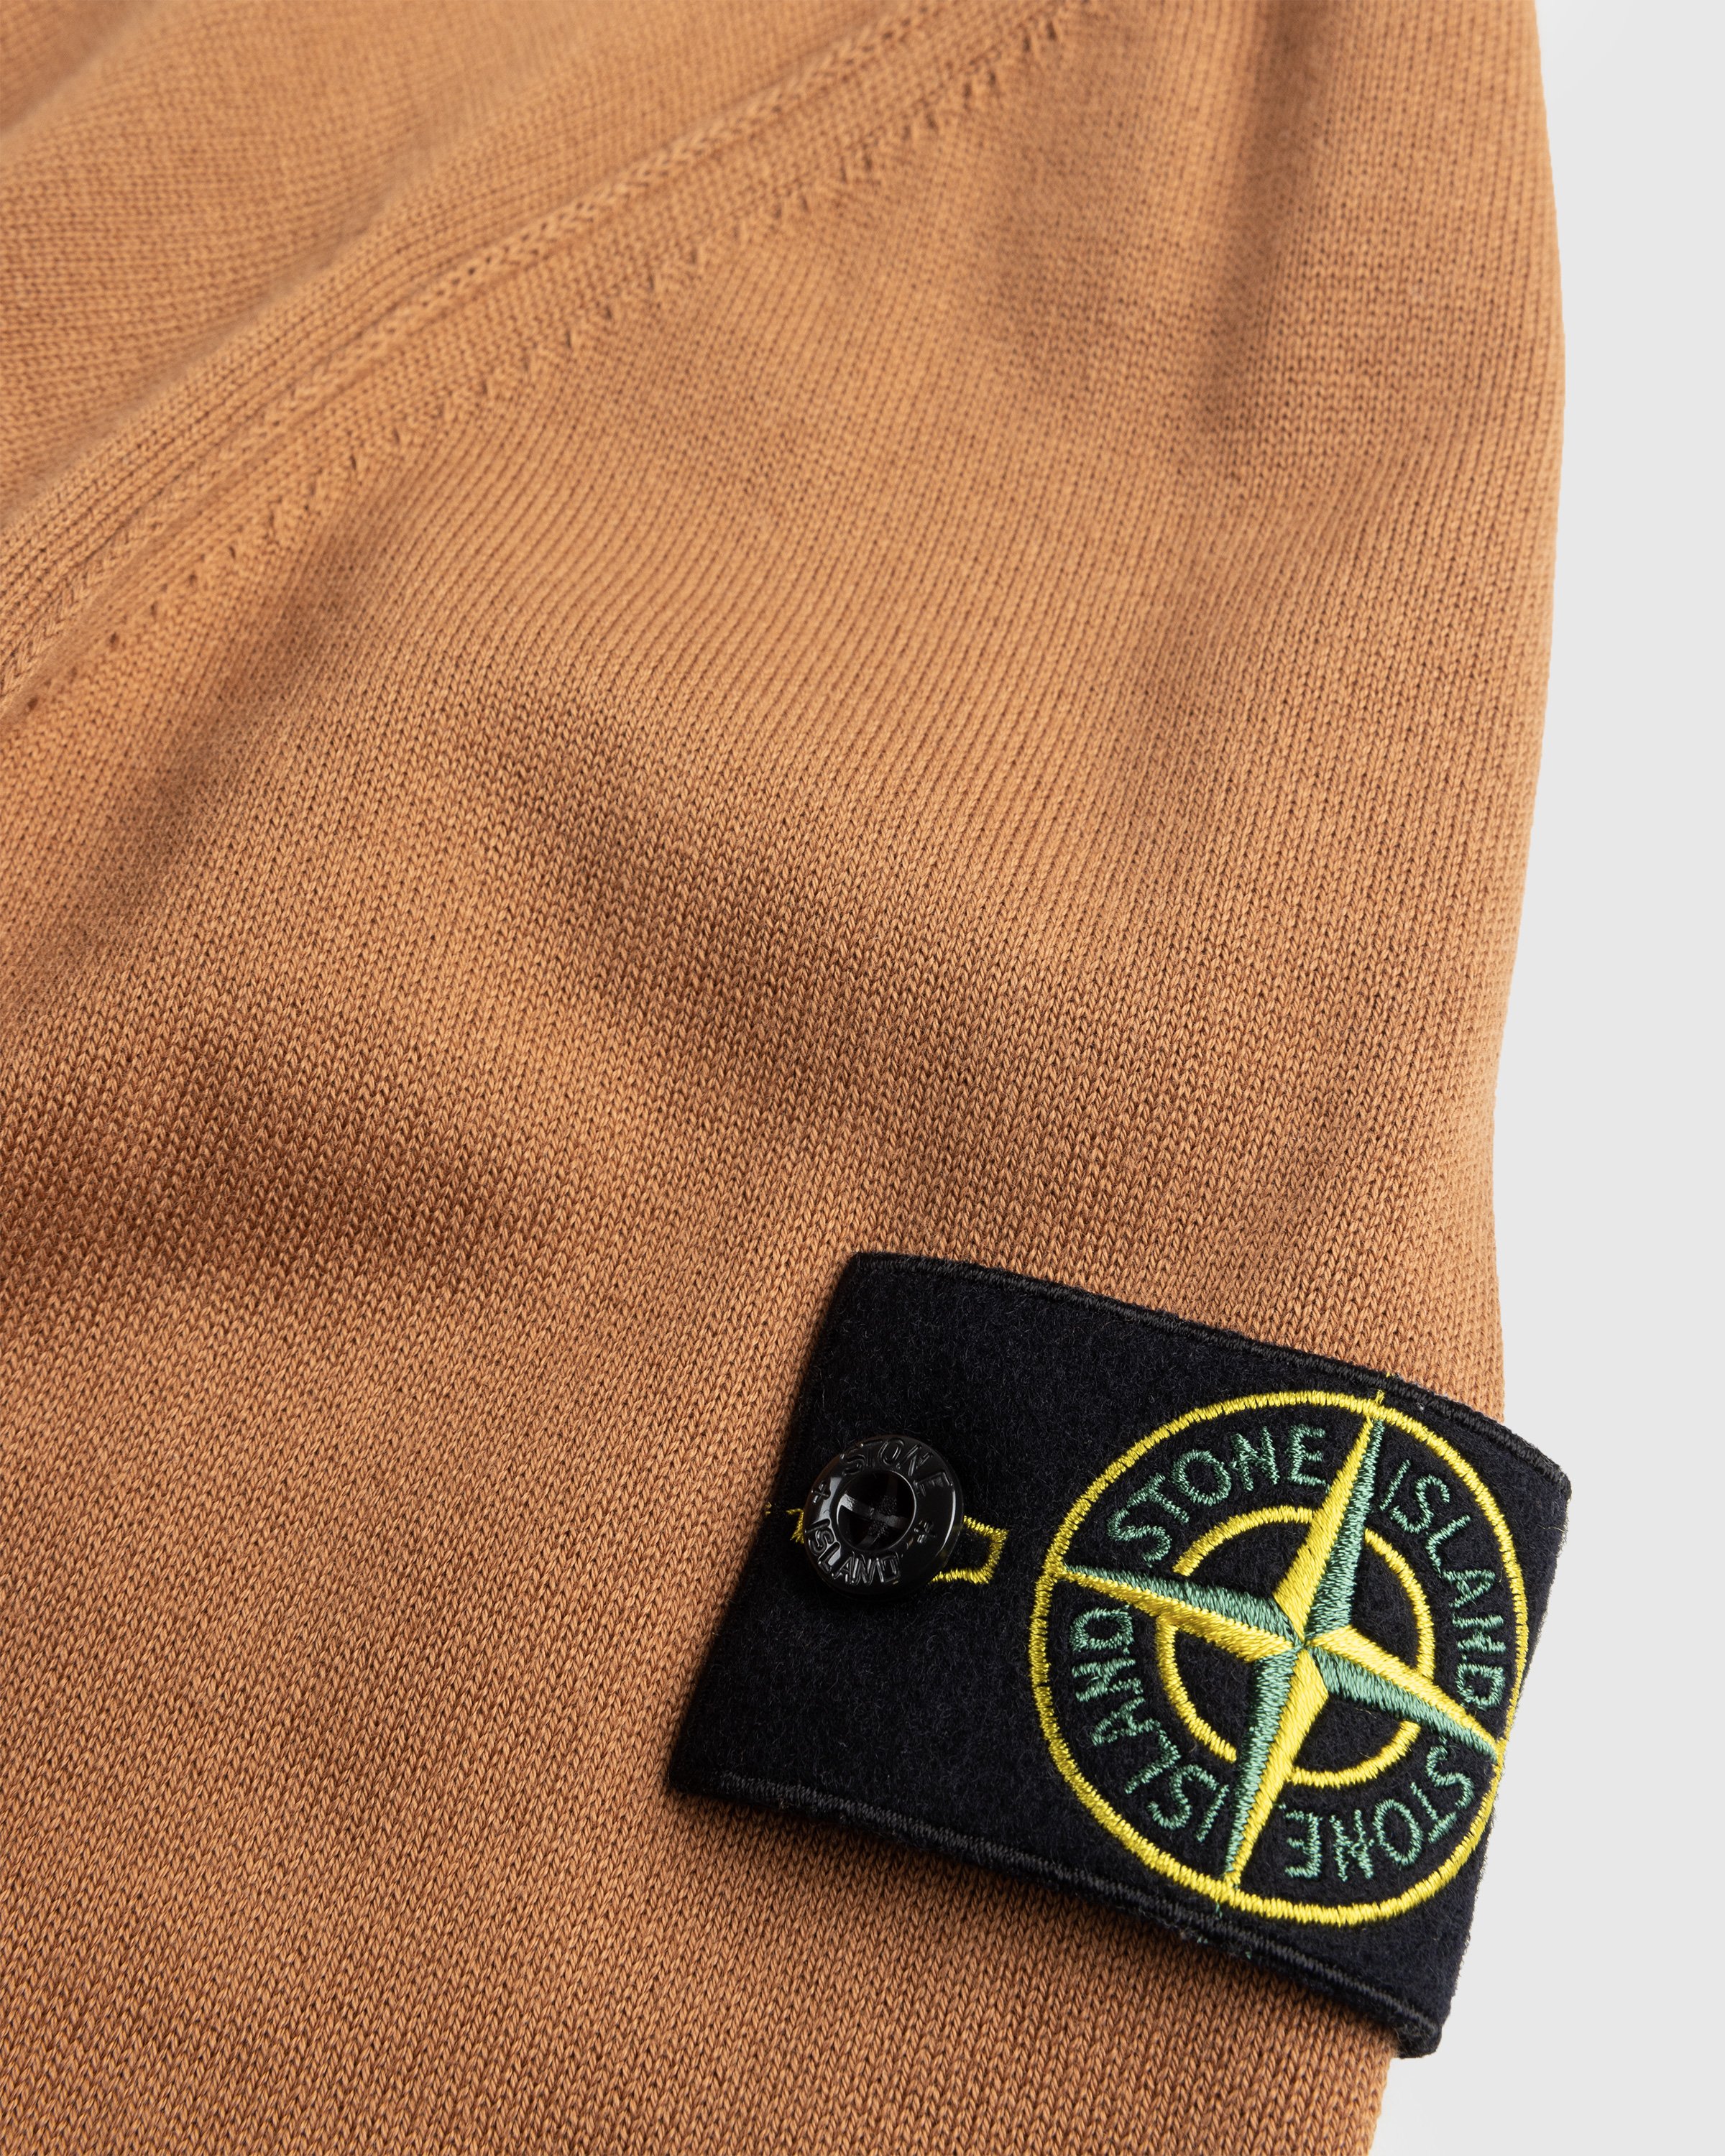 Stone Island - KNITWEAR RUST - Clothing - Red - Image 6